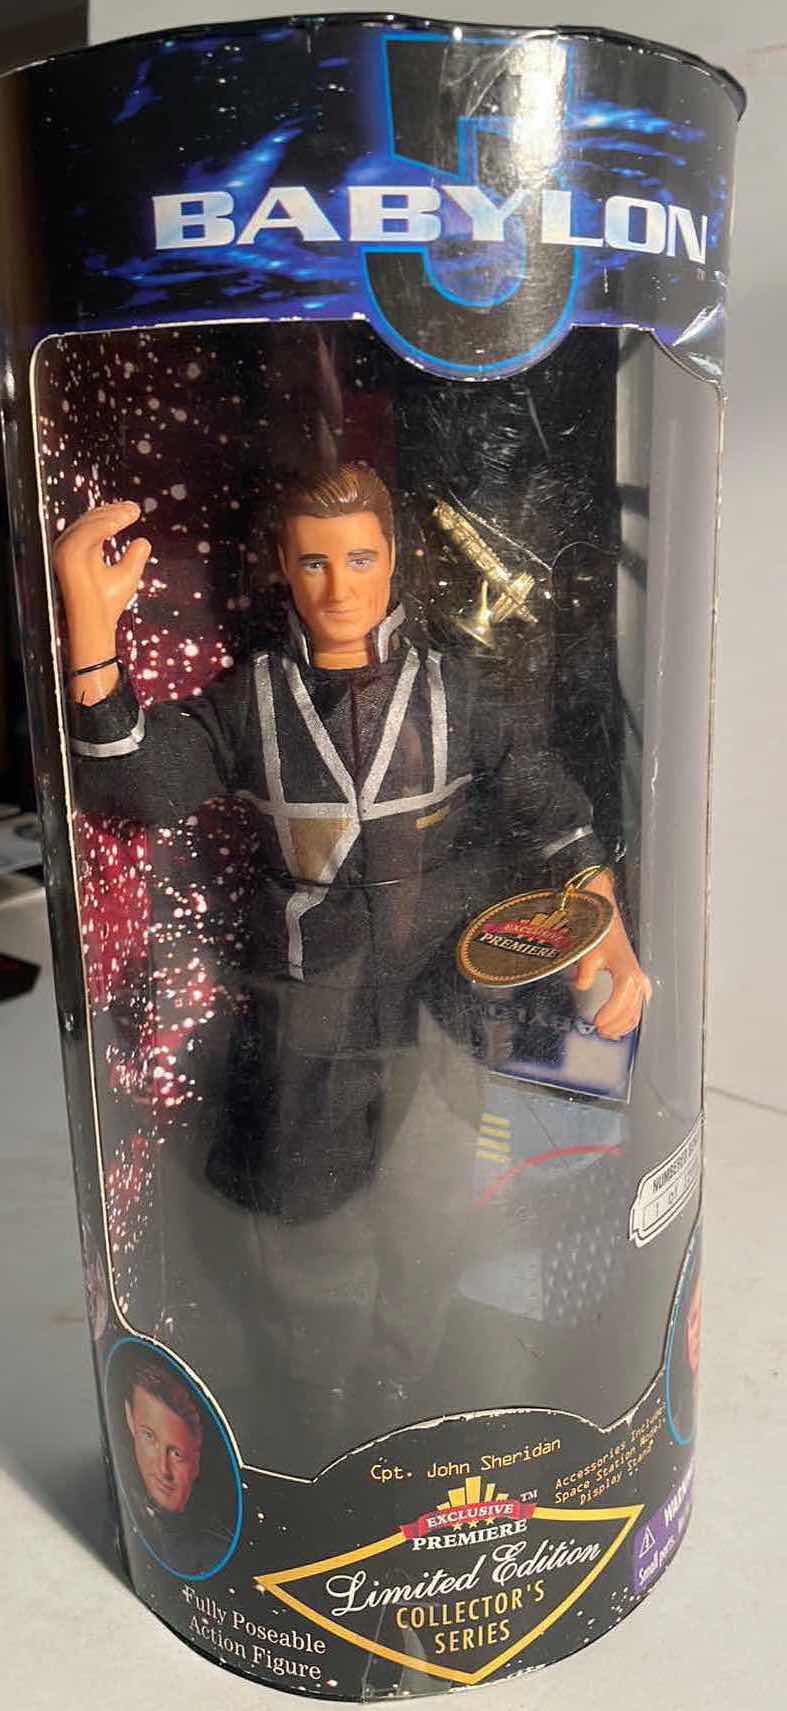 Photo 1 of NIB BABYLON 5 “CAPTAIN JOHN SHERIDAN” ACTION FIGURE EXCLUSIVE PREMIERE LIMITED EDITION 1 OF 12000 RETAIL PRICE $25.99